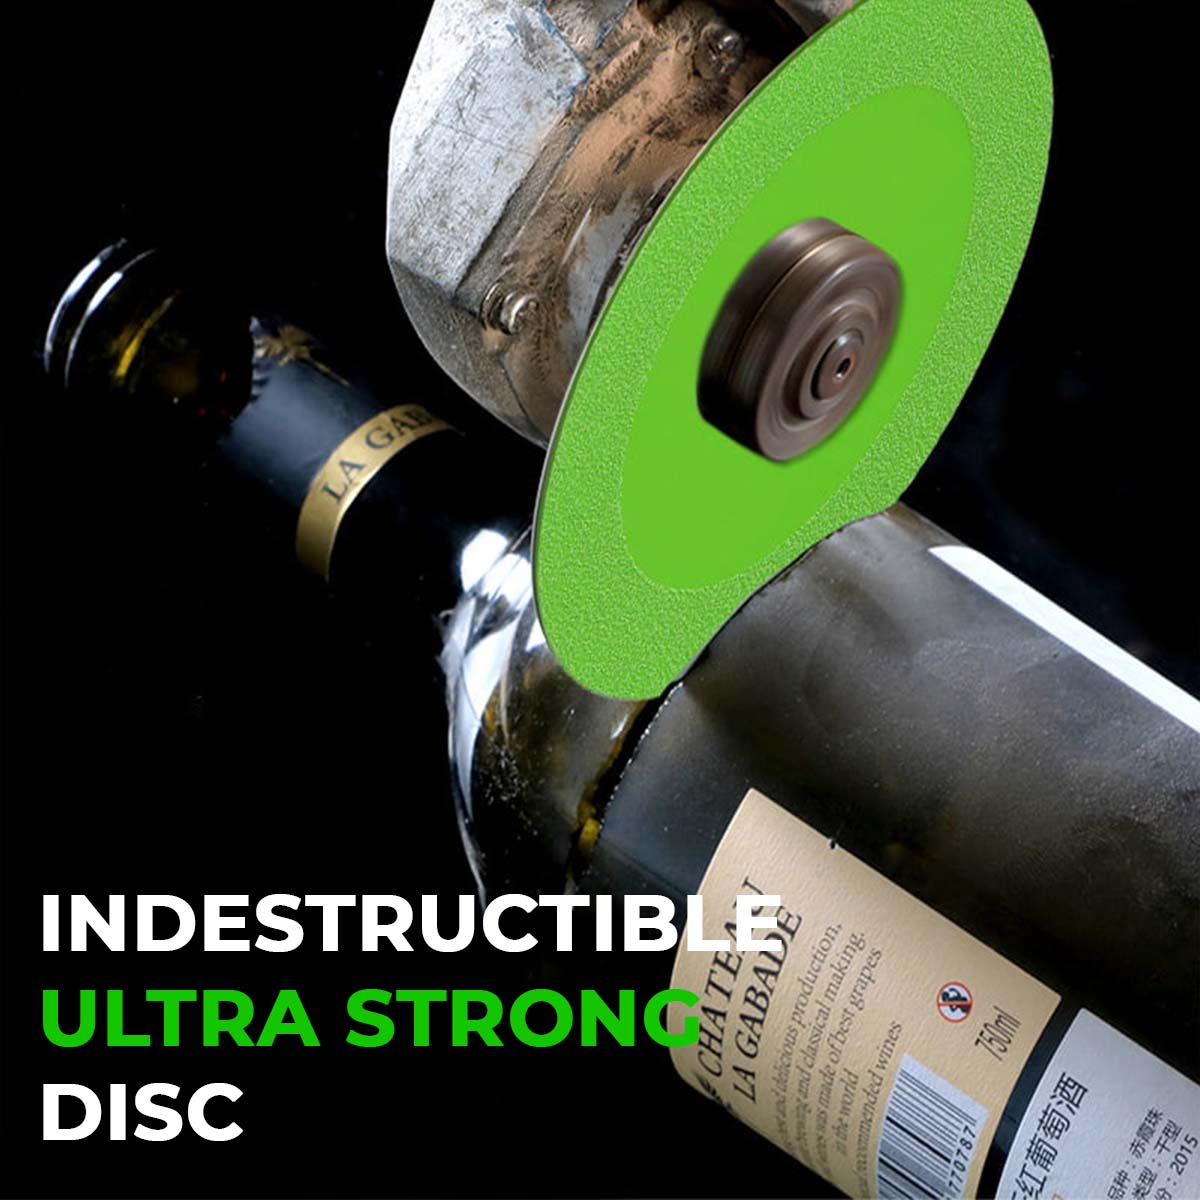 Indestructible Disc for Grinder, 2023 New Indestructible Disc 2.0 - Cut  Everything in Seconds, Indestructible Cutting Disc, 4 X 1/25 X 4/5  Diamond